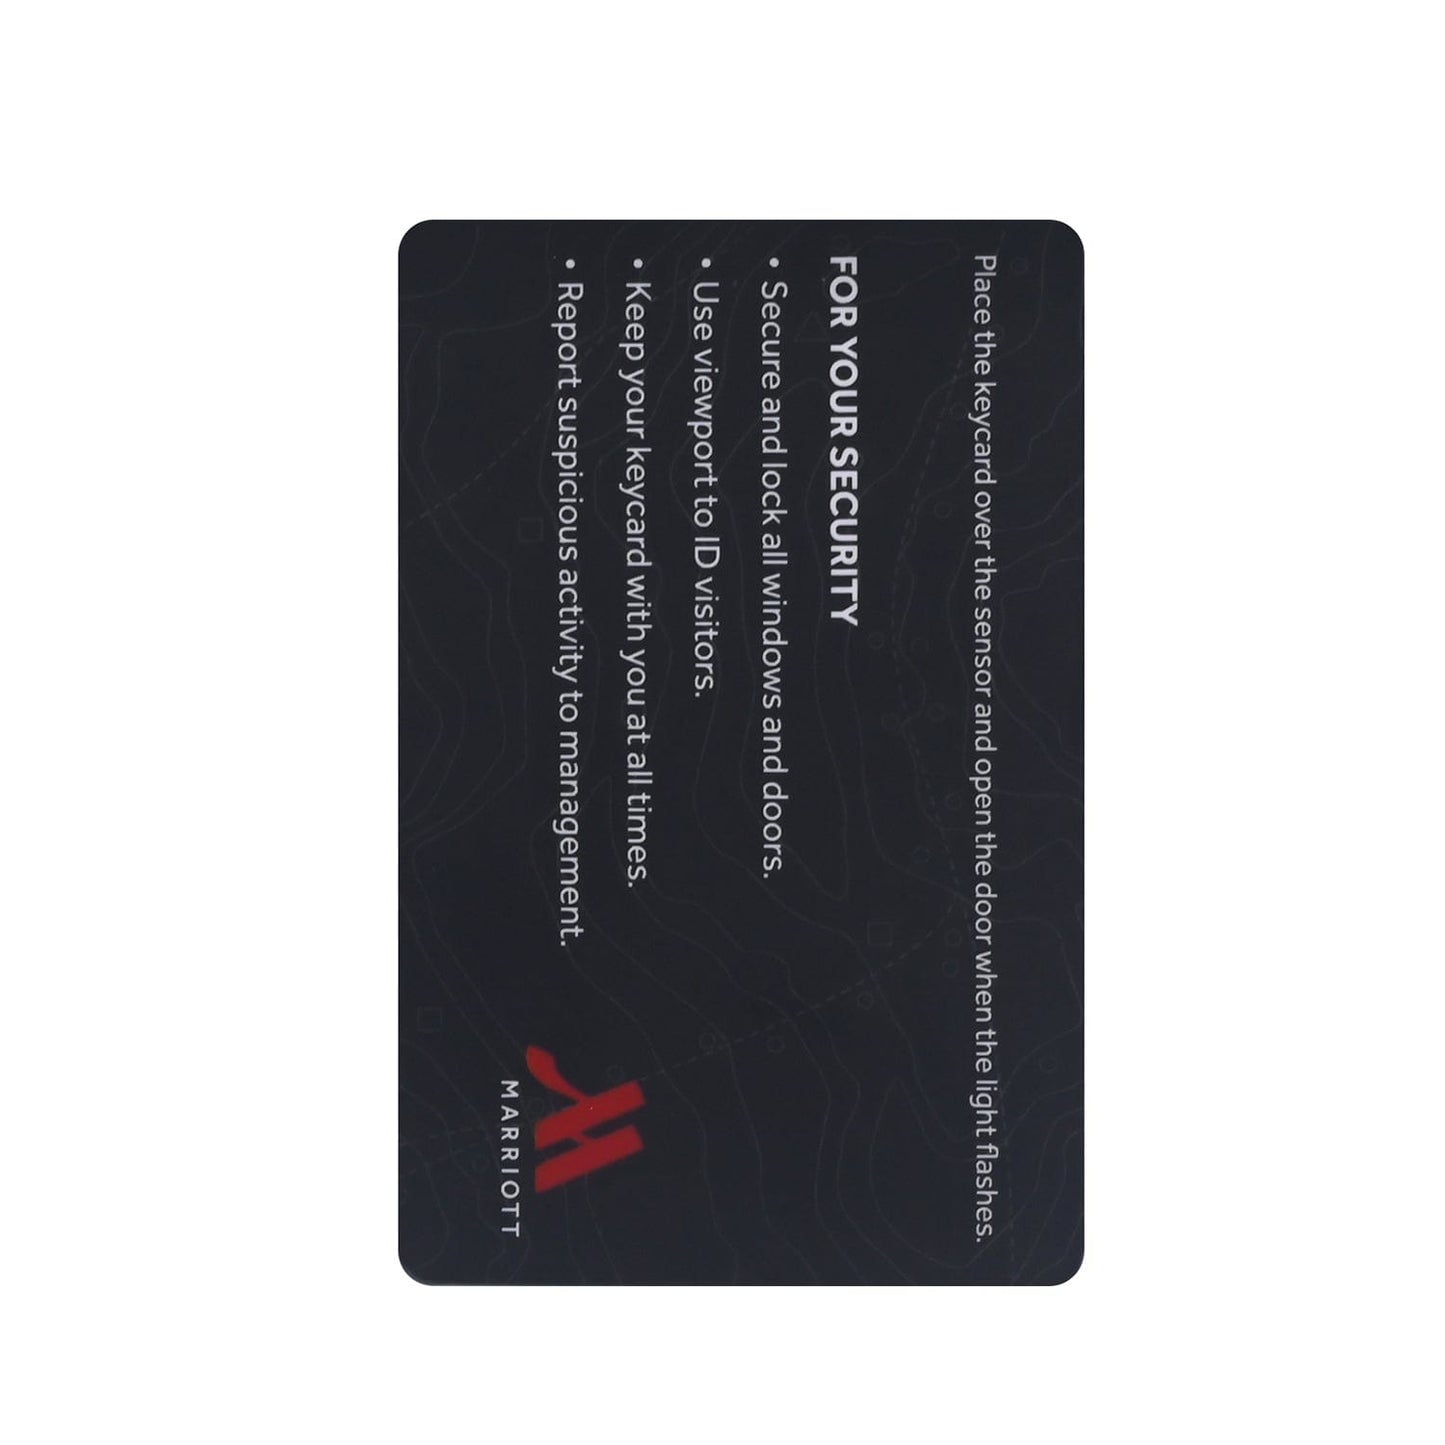 Marriott Bonvoy Elite Member 1K RFID Key Cards Compatible with Assa Abloy* Guest Lock Systems-See Description (Sold in boxes of 200)